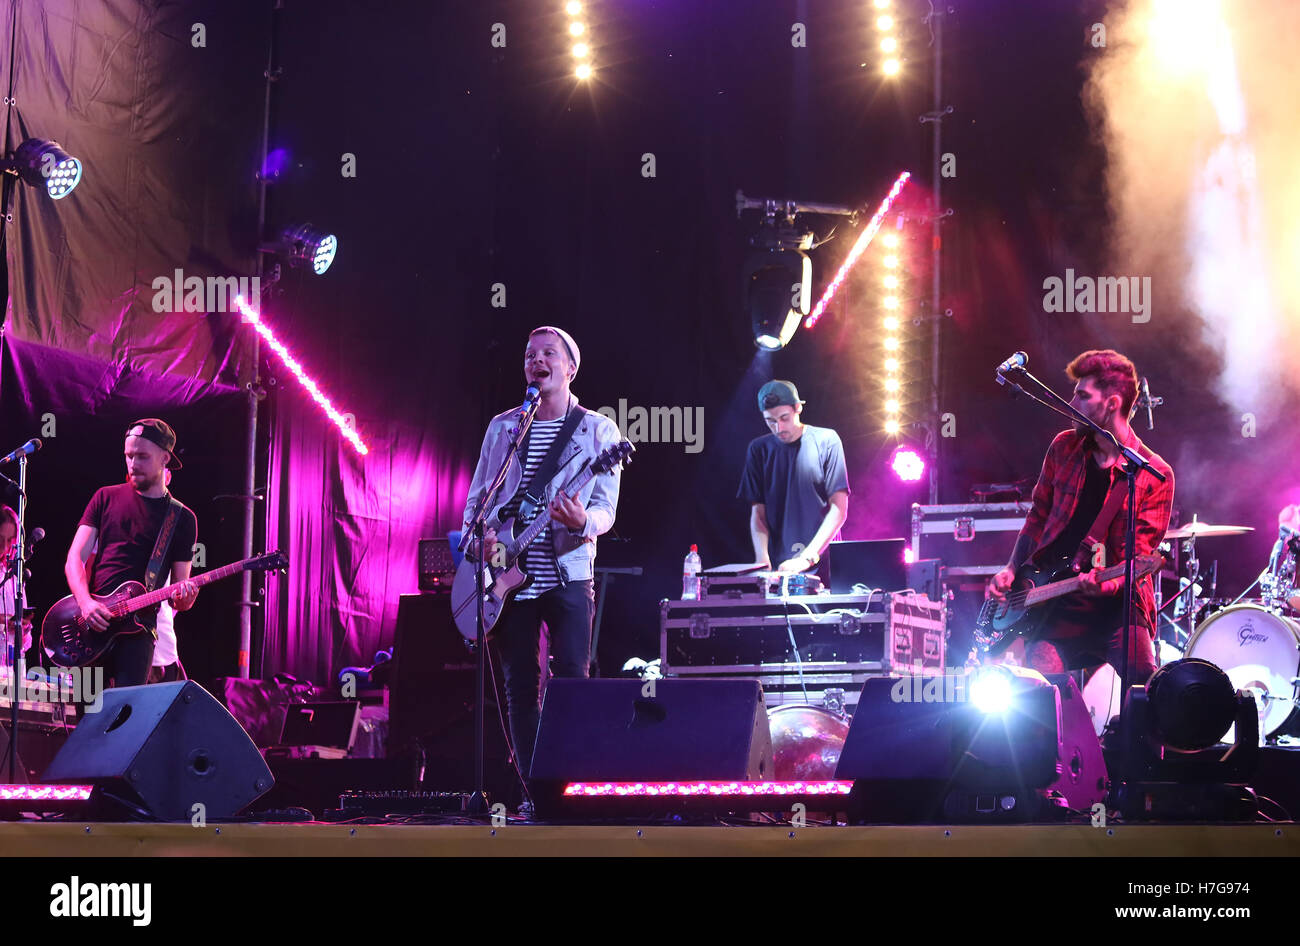 KYIV, UKRAINE - SEPTEMBER 5, 2016: O.Torvald band performs on stage near the NSC Olympic stadium during rock-concert before FIFA World Cup 2018 qualifying game Ukraine v Iceland in Kyiv, Ukraine Stock Photo